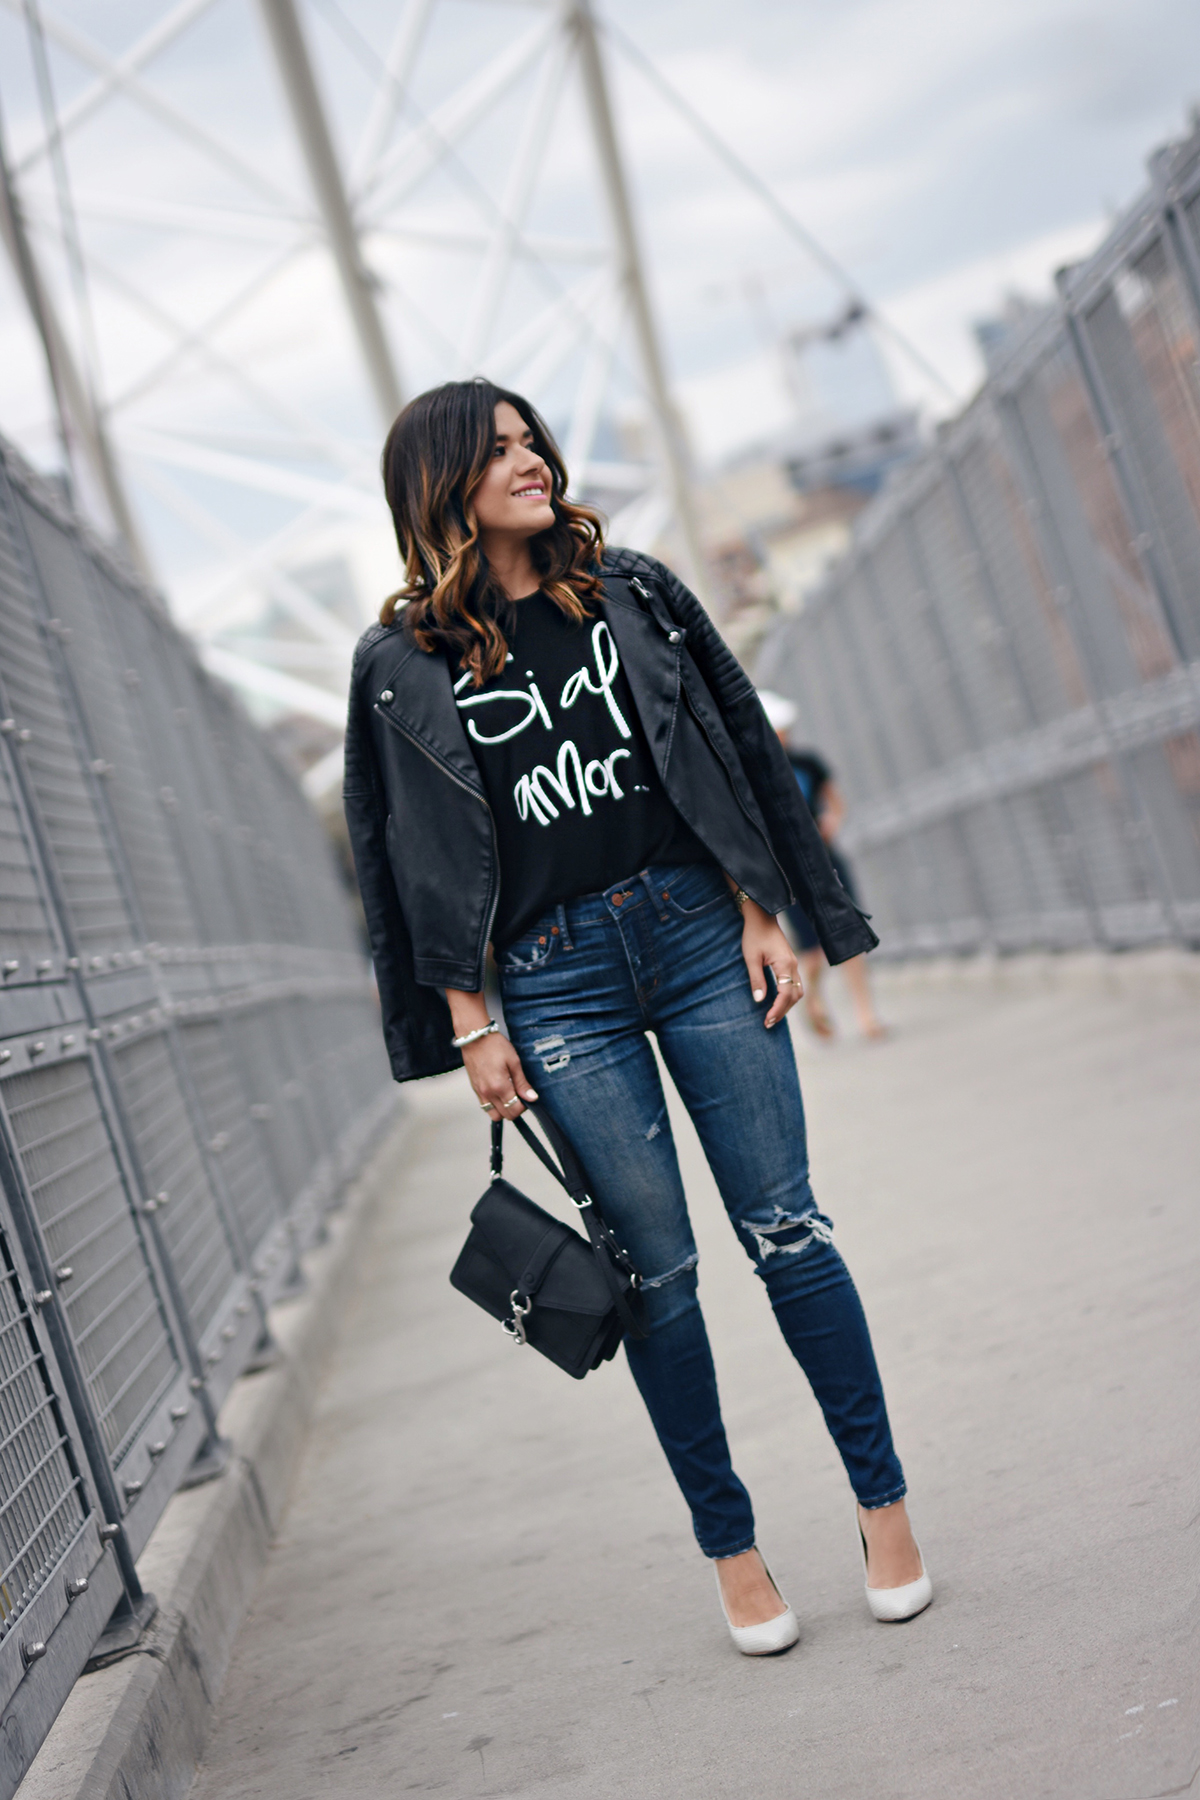 Carolina Hellal of Chic Talk wearing a t-shirt from the Si al amor t-shirt collection by popular Denver fashion blogger Chic Talk